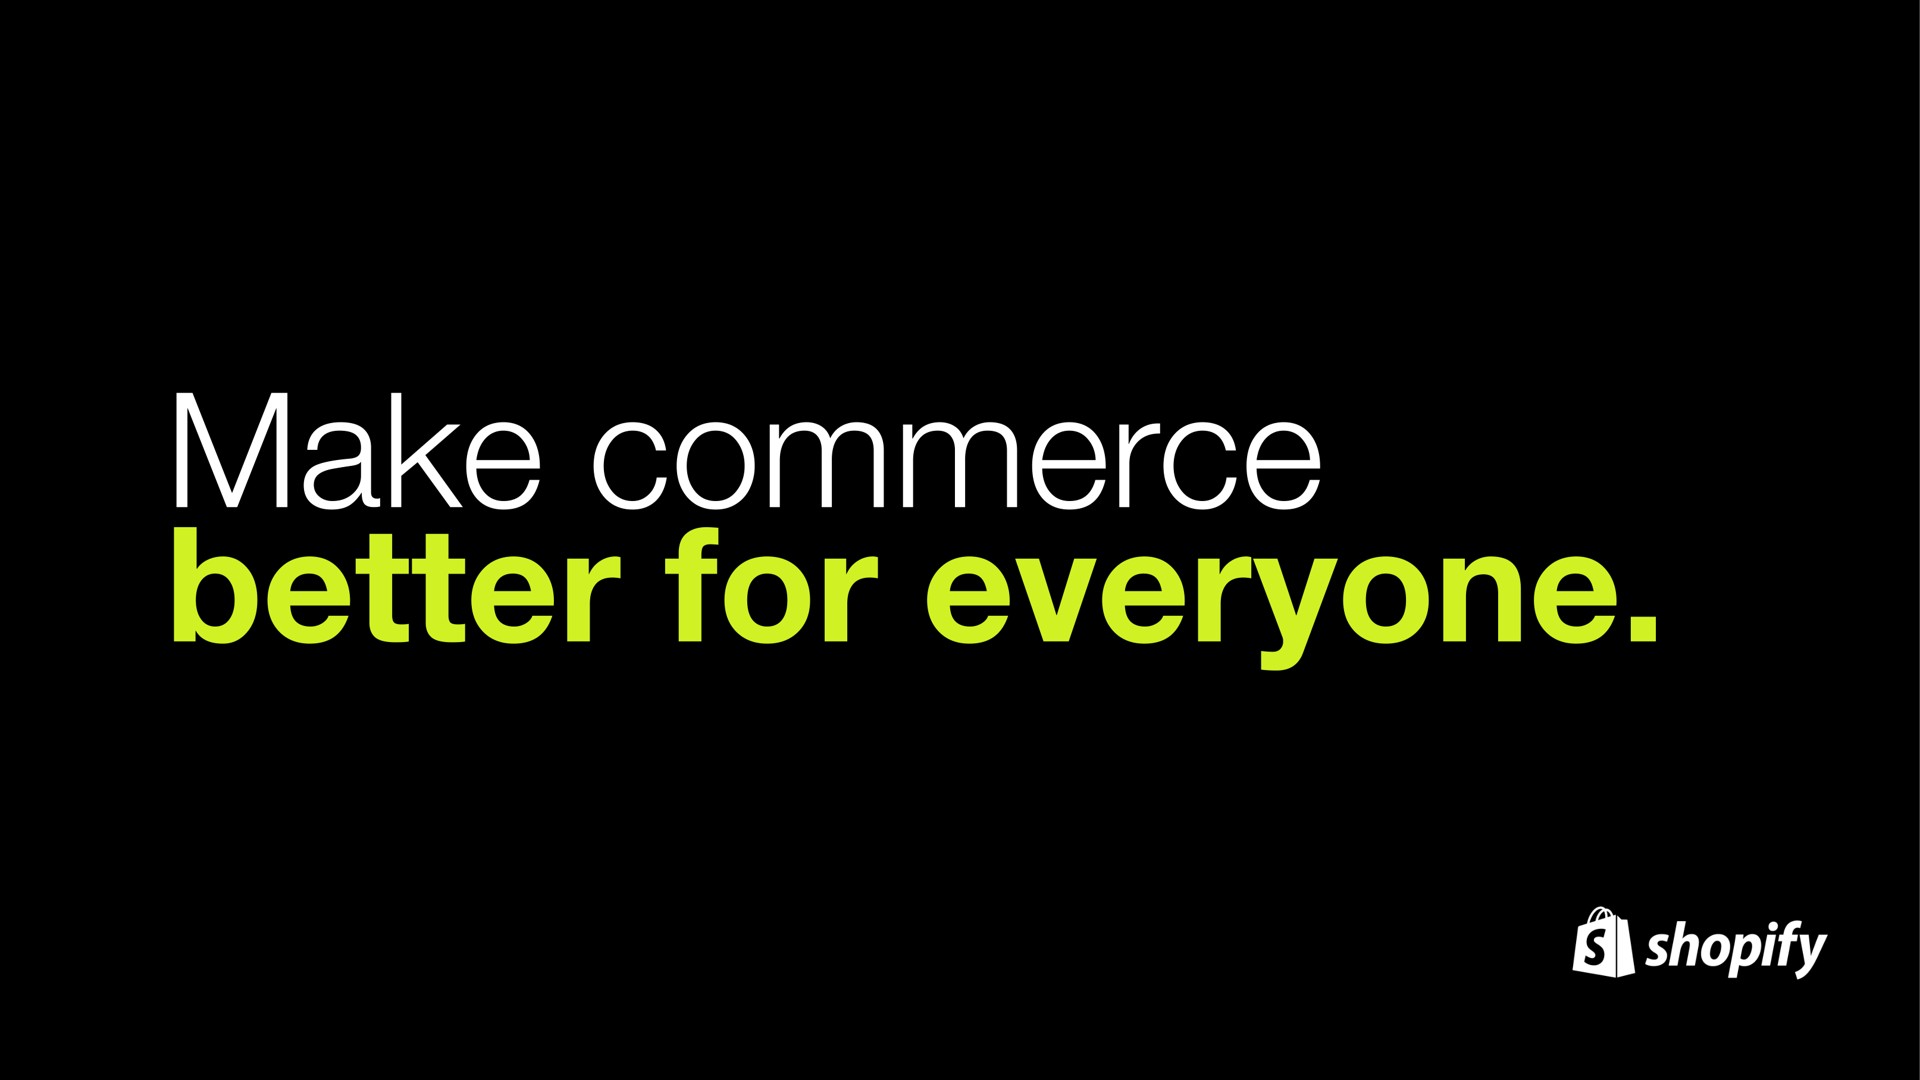 make commerce better for everyone is | Shopify